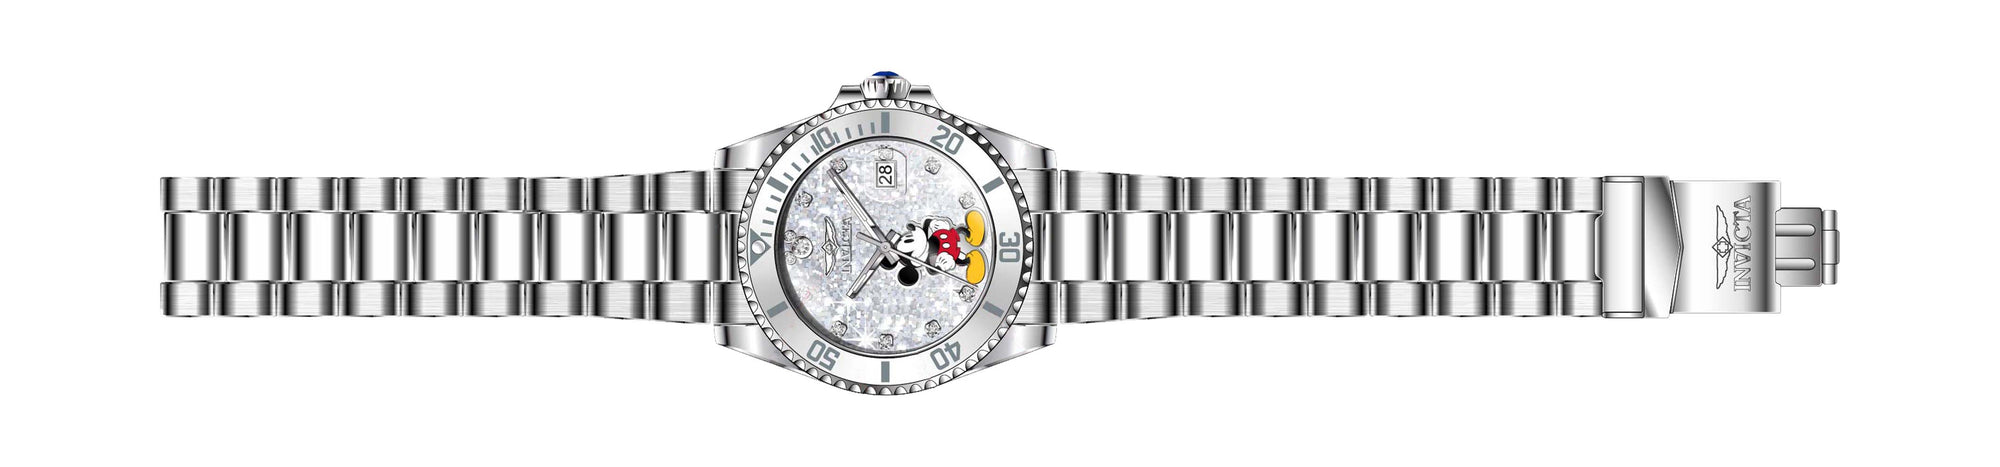 Band for Invicta Disney Limited Edition Mickey Mouse Lady 41213